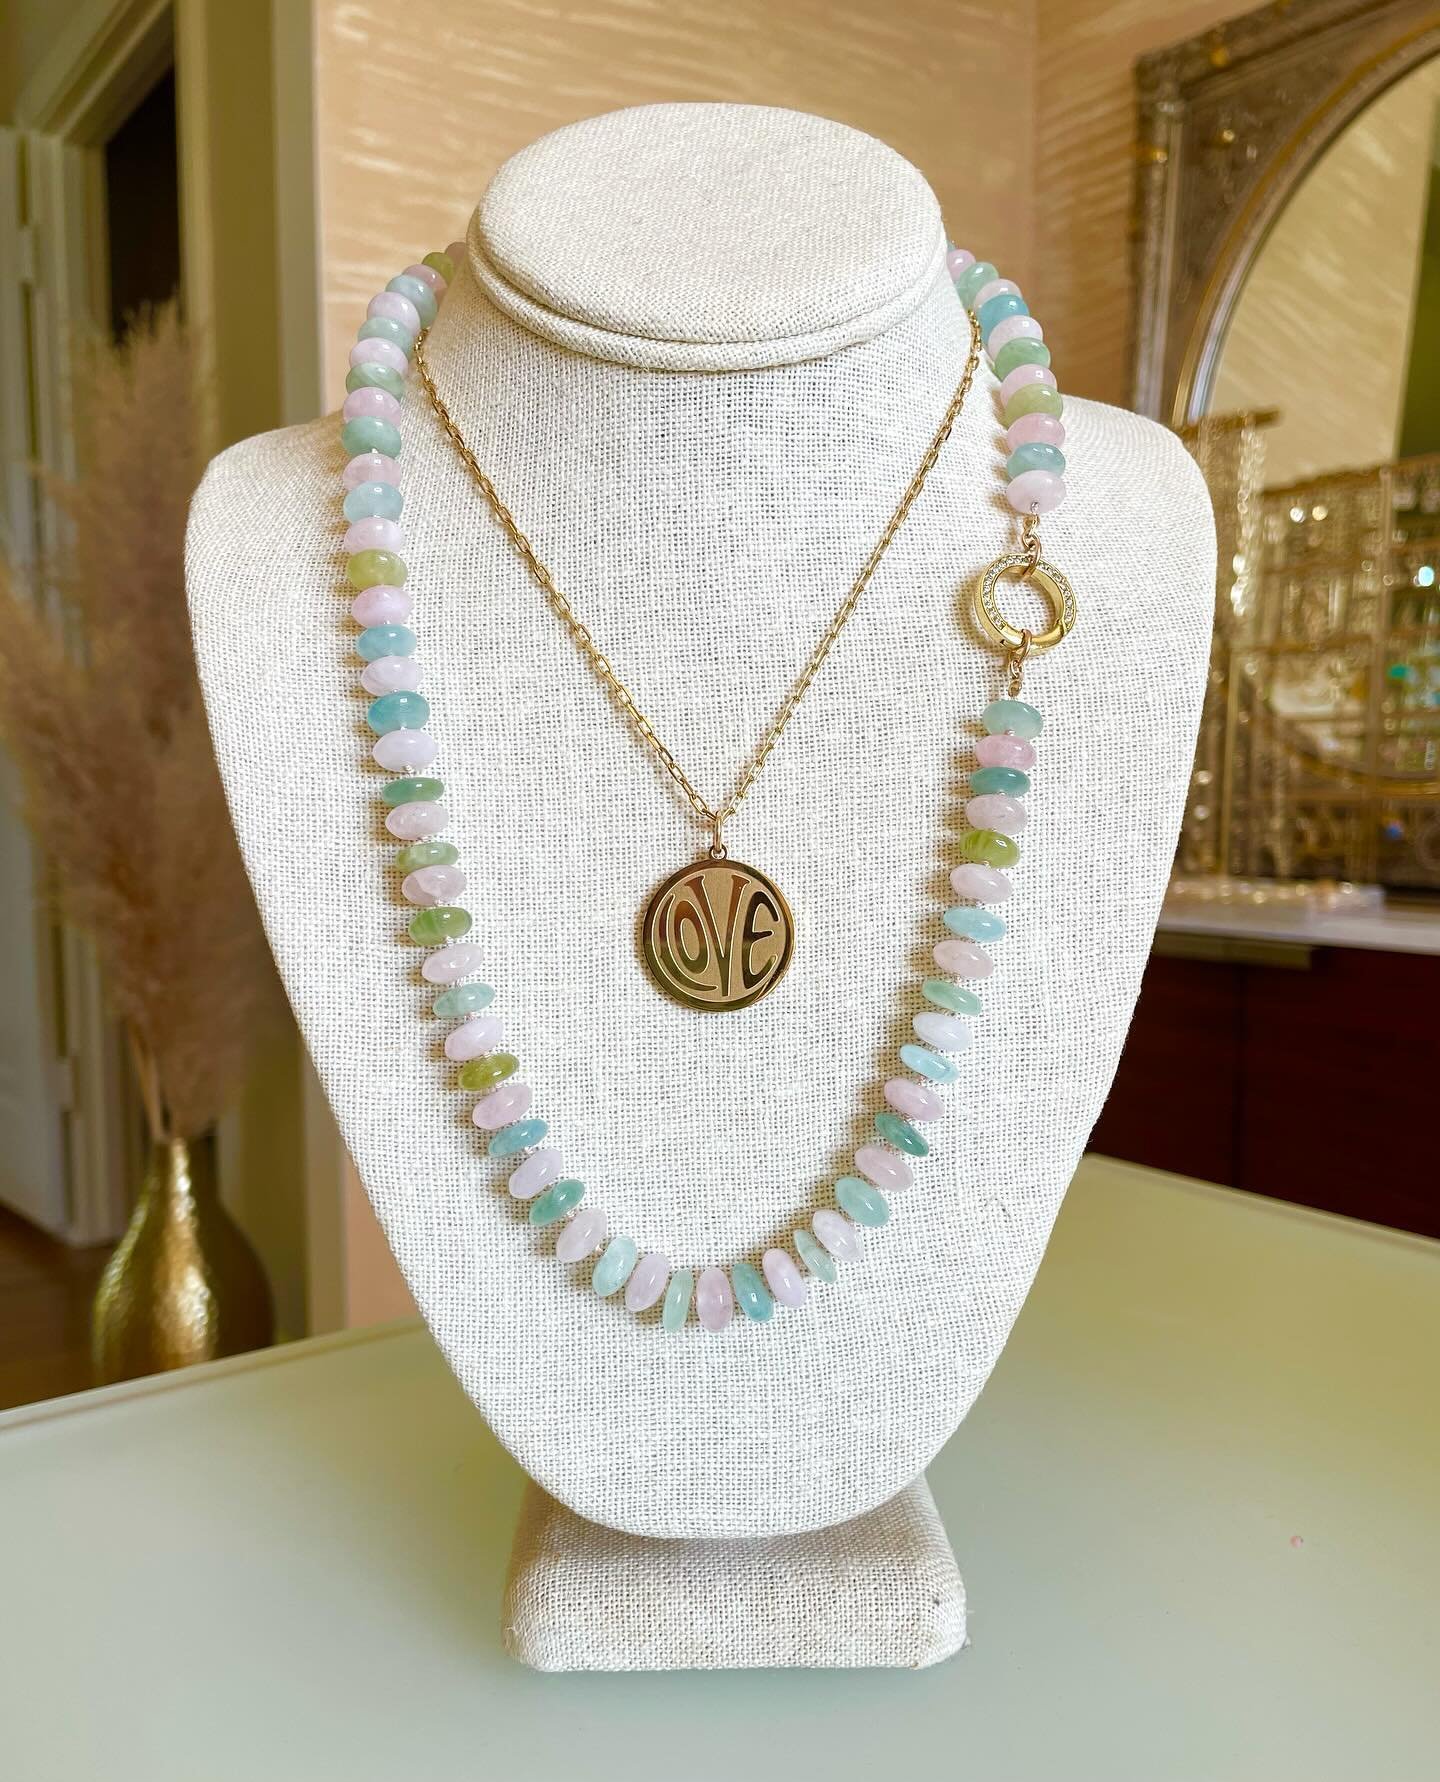 Elevate your #layeringnecklaces by adding gemstones &amp; medallions ~ adds a pop of color &amp; texture also makes for great gift ideas for mom or mother-figures in your life! #mothersday #gifts #jewelrydesigner #jewelryalwaysfits #sanfrancisco #bou